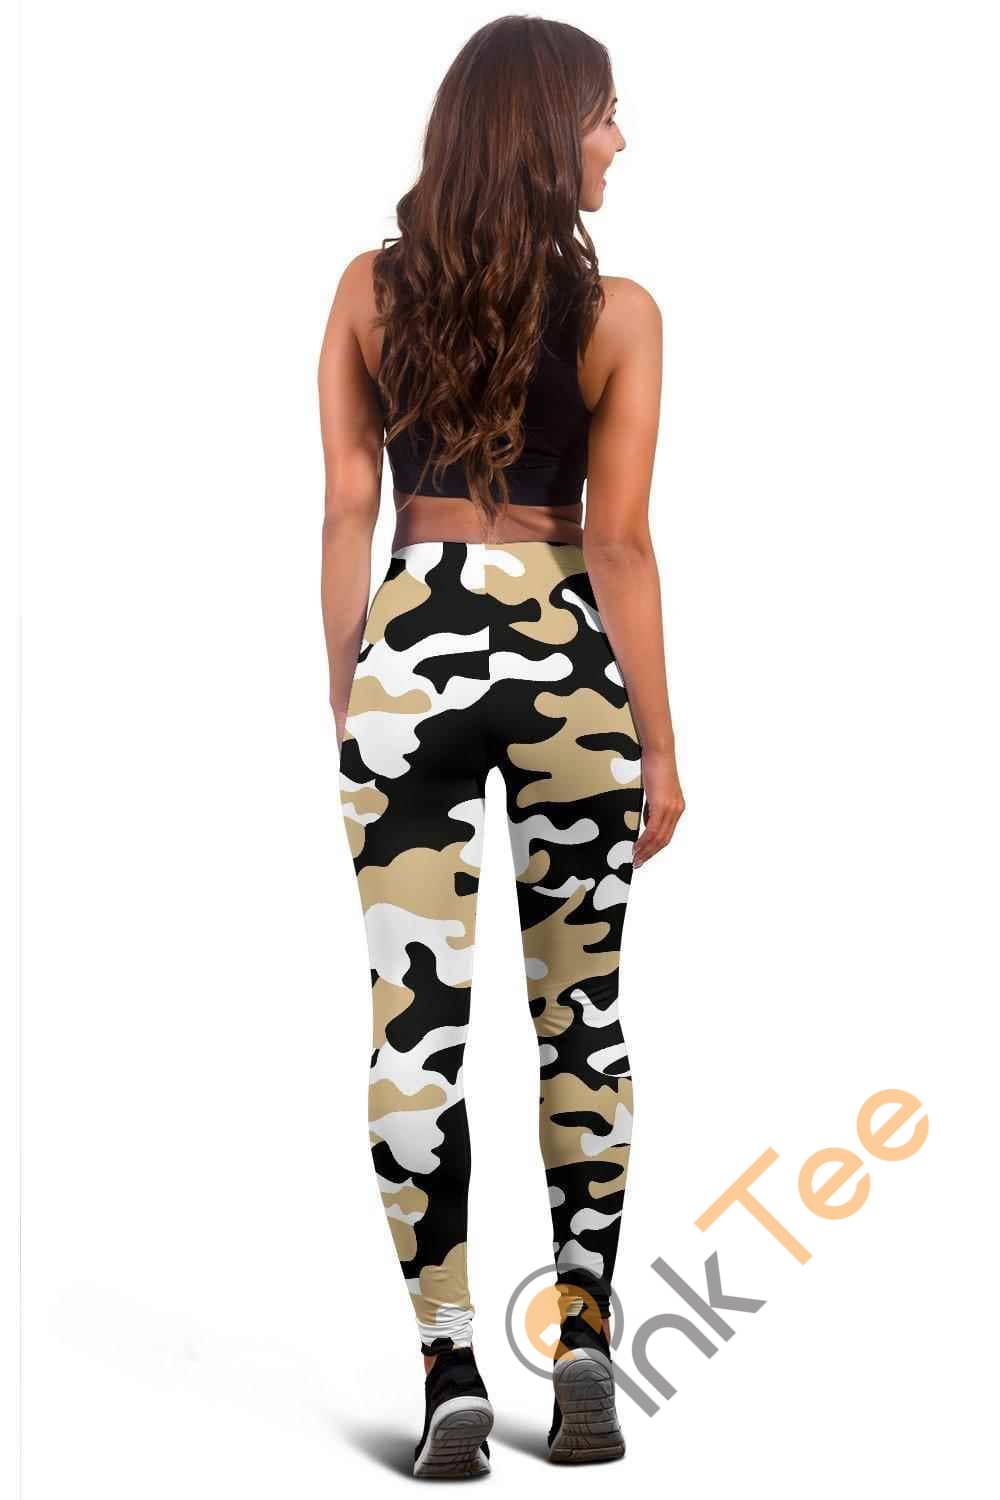 Inktee Store - New Orleans Saints Inspired Tru Camo 3D All Over Print For Yoga Fitness Fashion Women'S Leggings Image